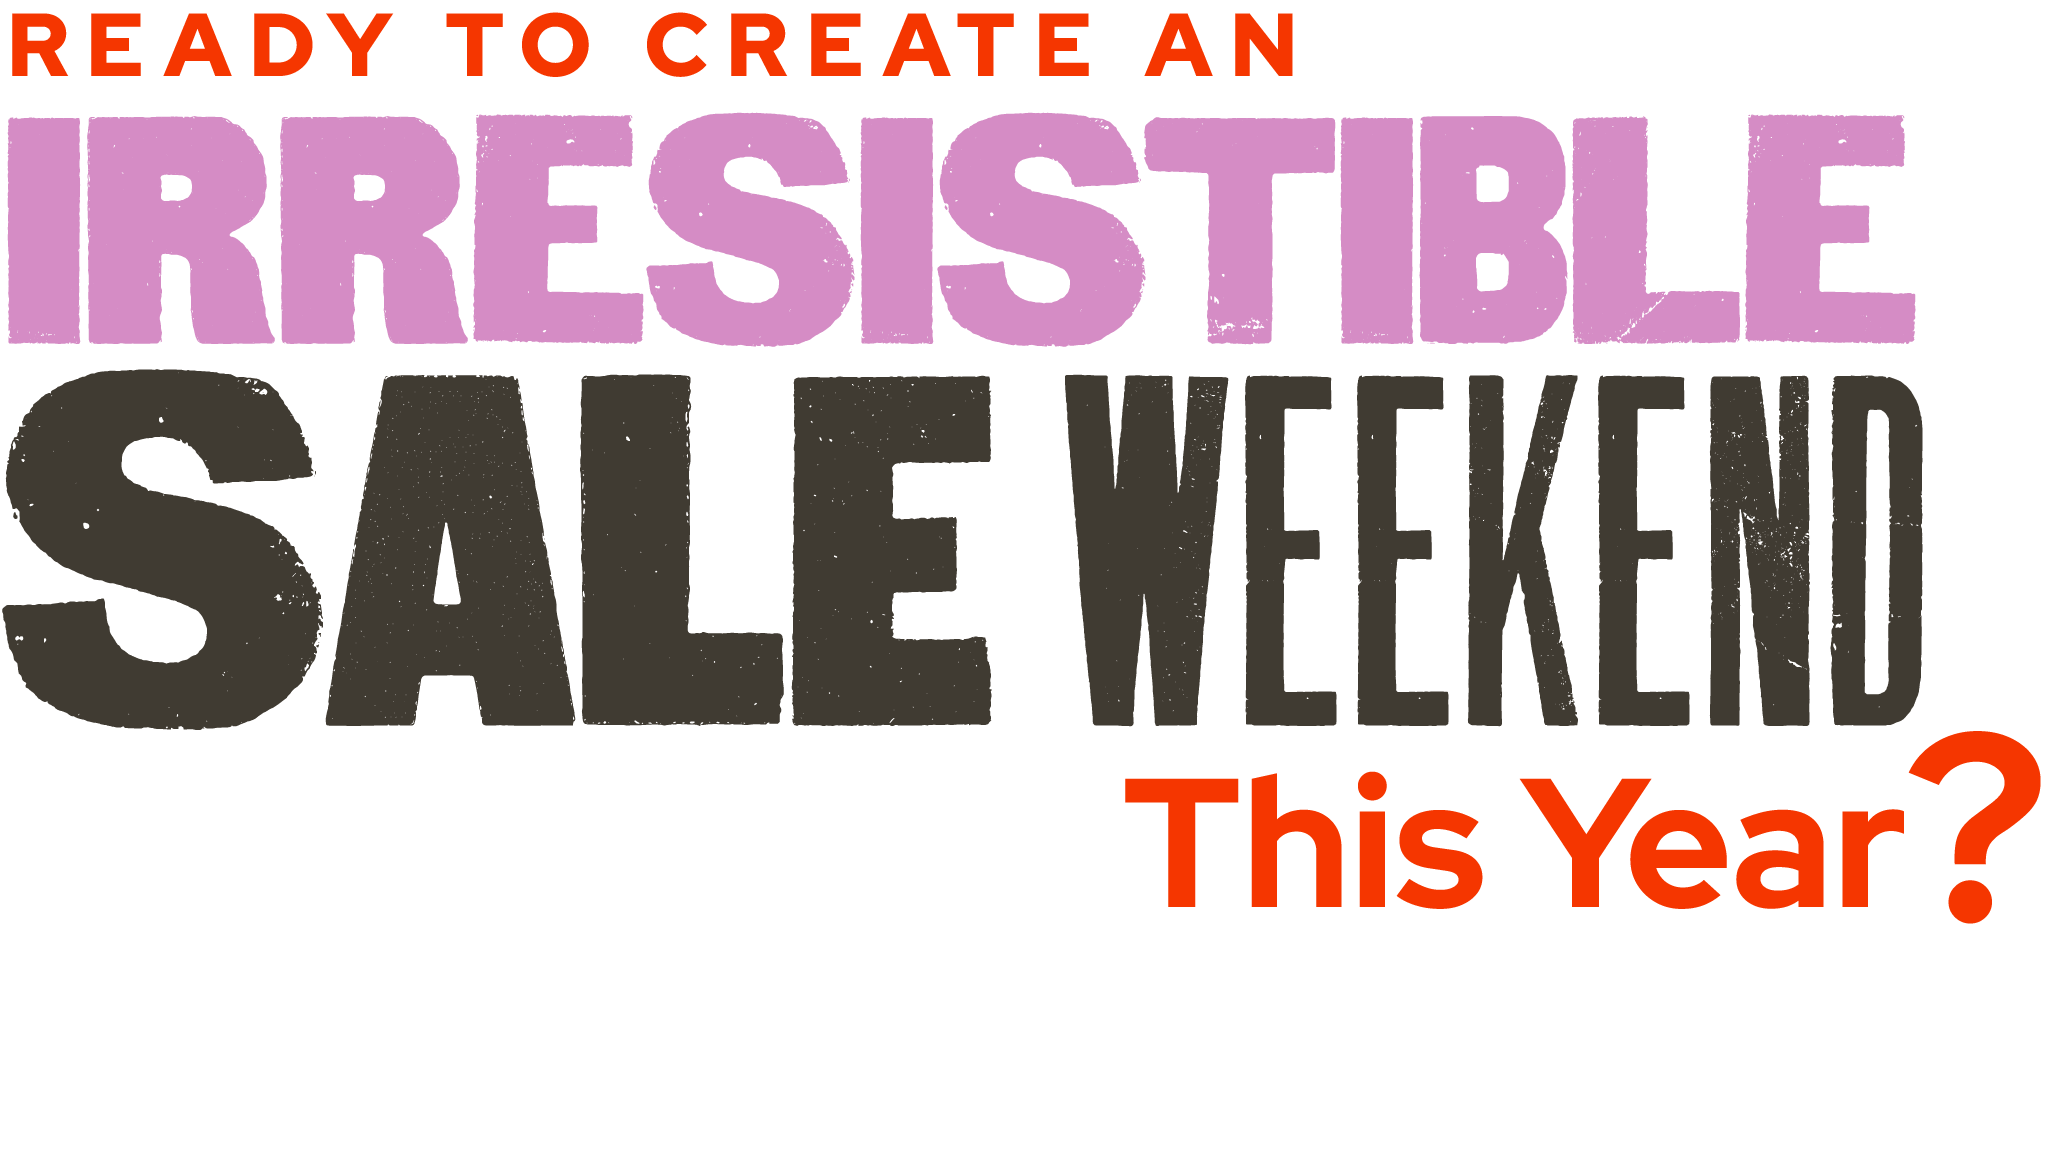 Ready to create an irresistible sale weekend this year?